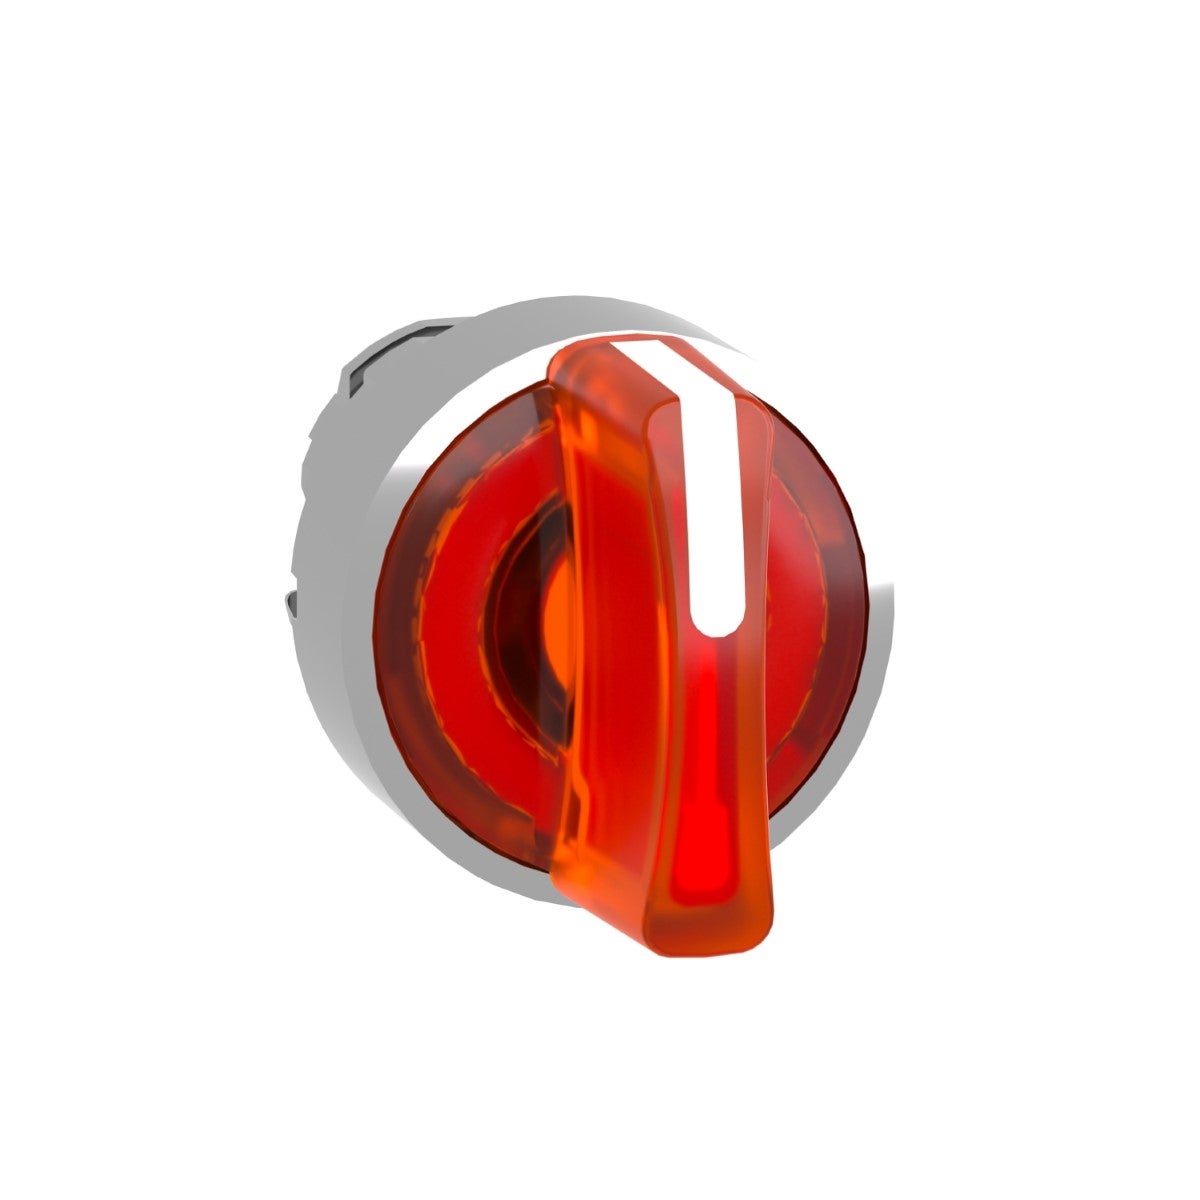 Head for illuminated selector switch, Harmony XB4, metal, orange handle, 22mm, universal LED, 3 positions, stay put